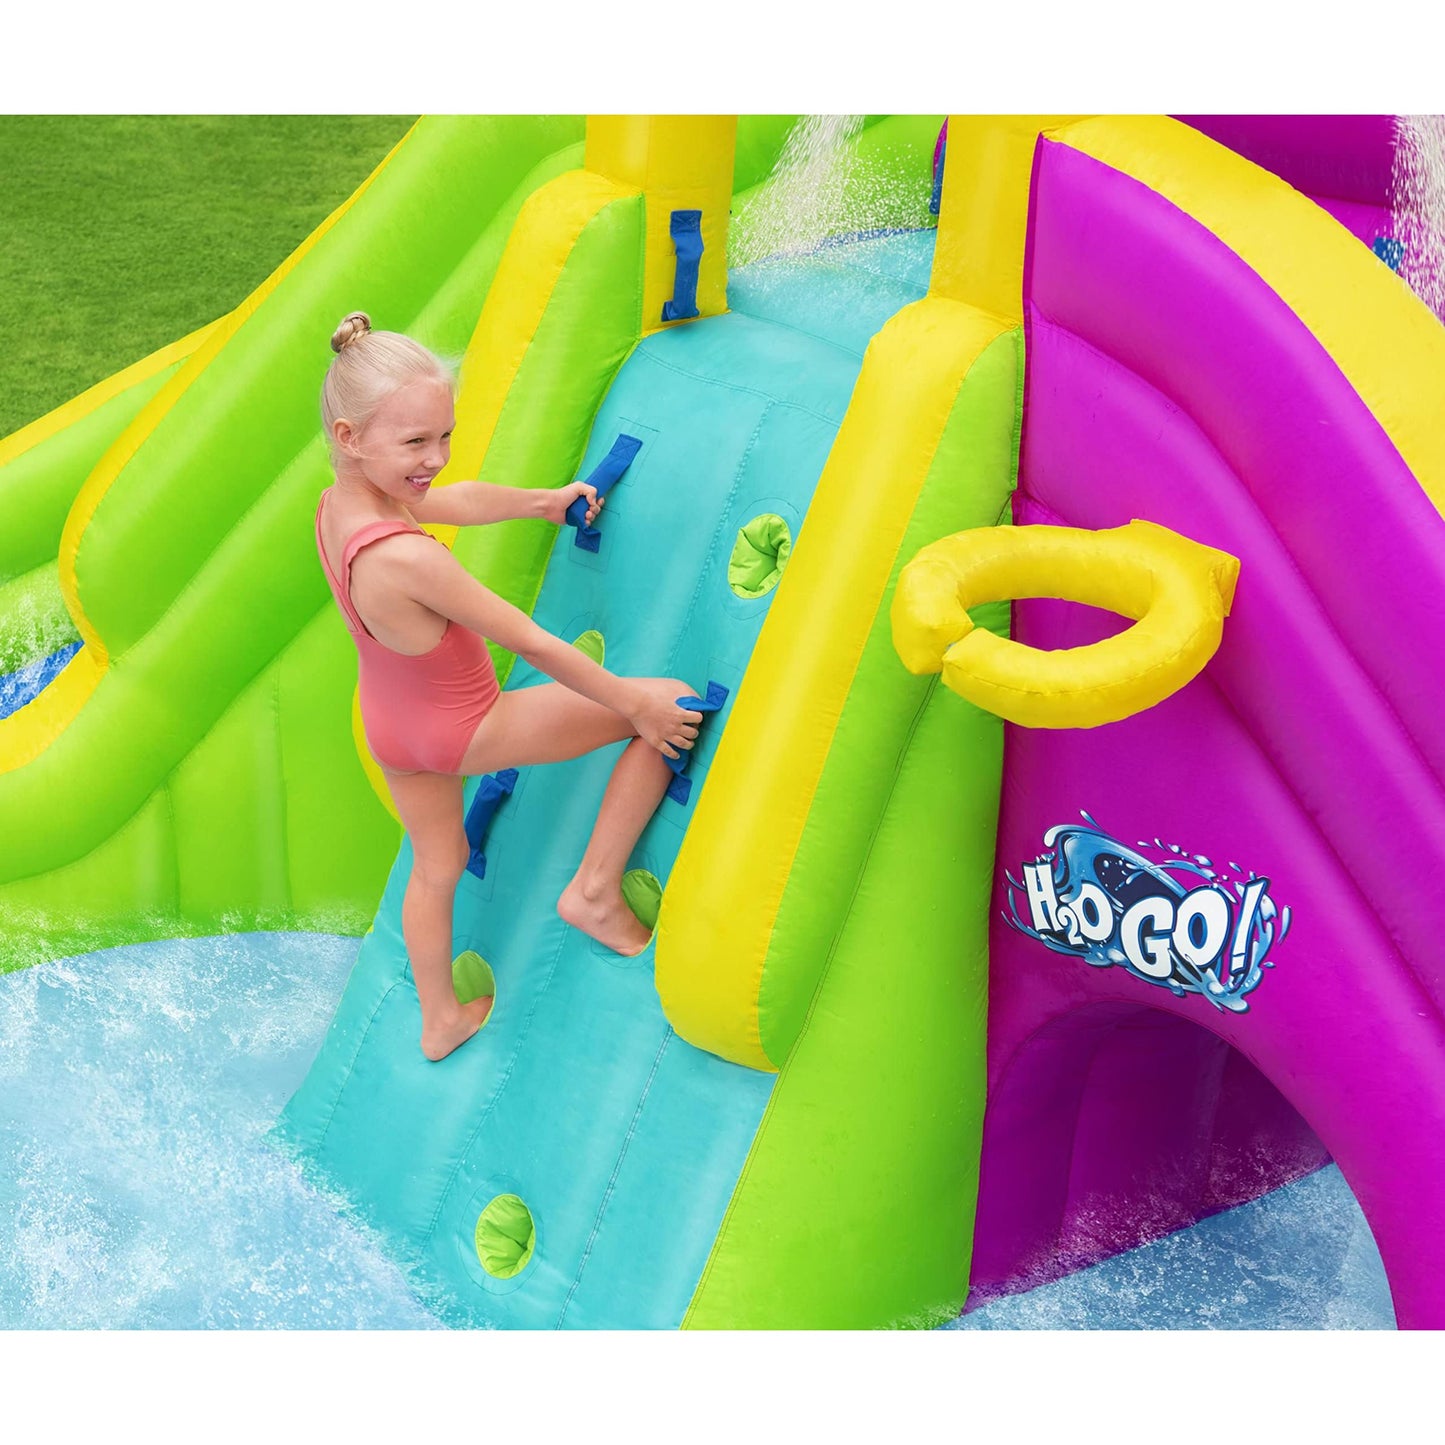 Bestway H2OGO! Funfinity Splash Kids Outdoor Inflatable Mega Water Park with Blower Air Pump, Slides, Climbing Wall, and Water Sprayers